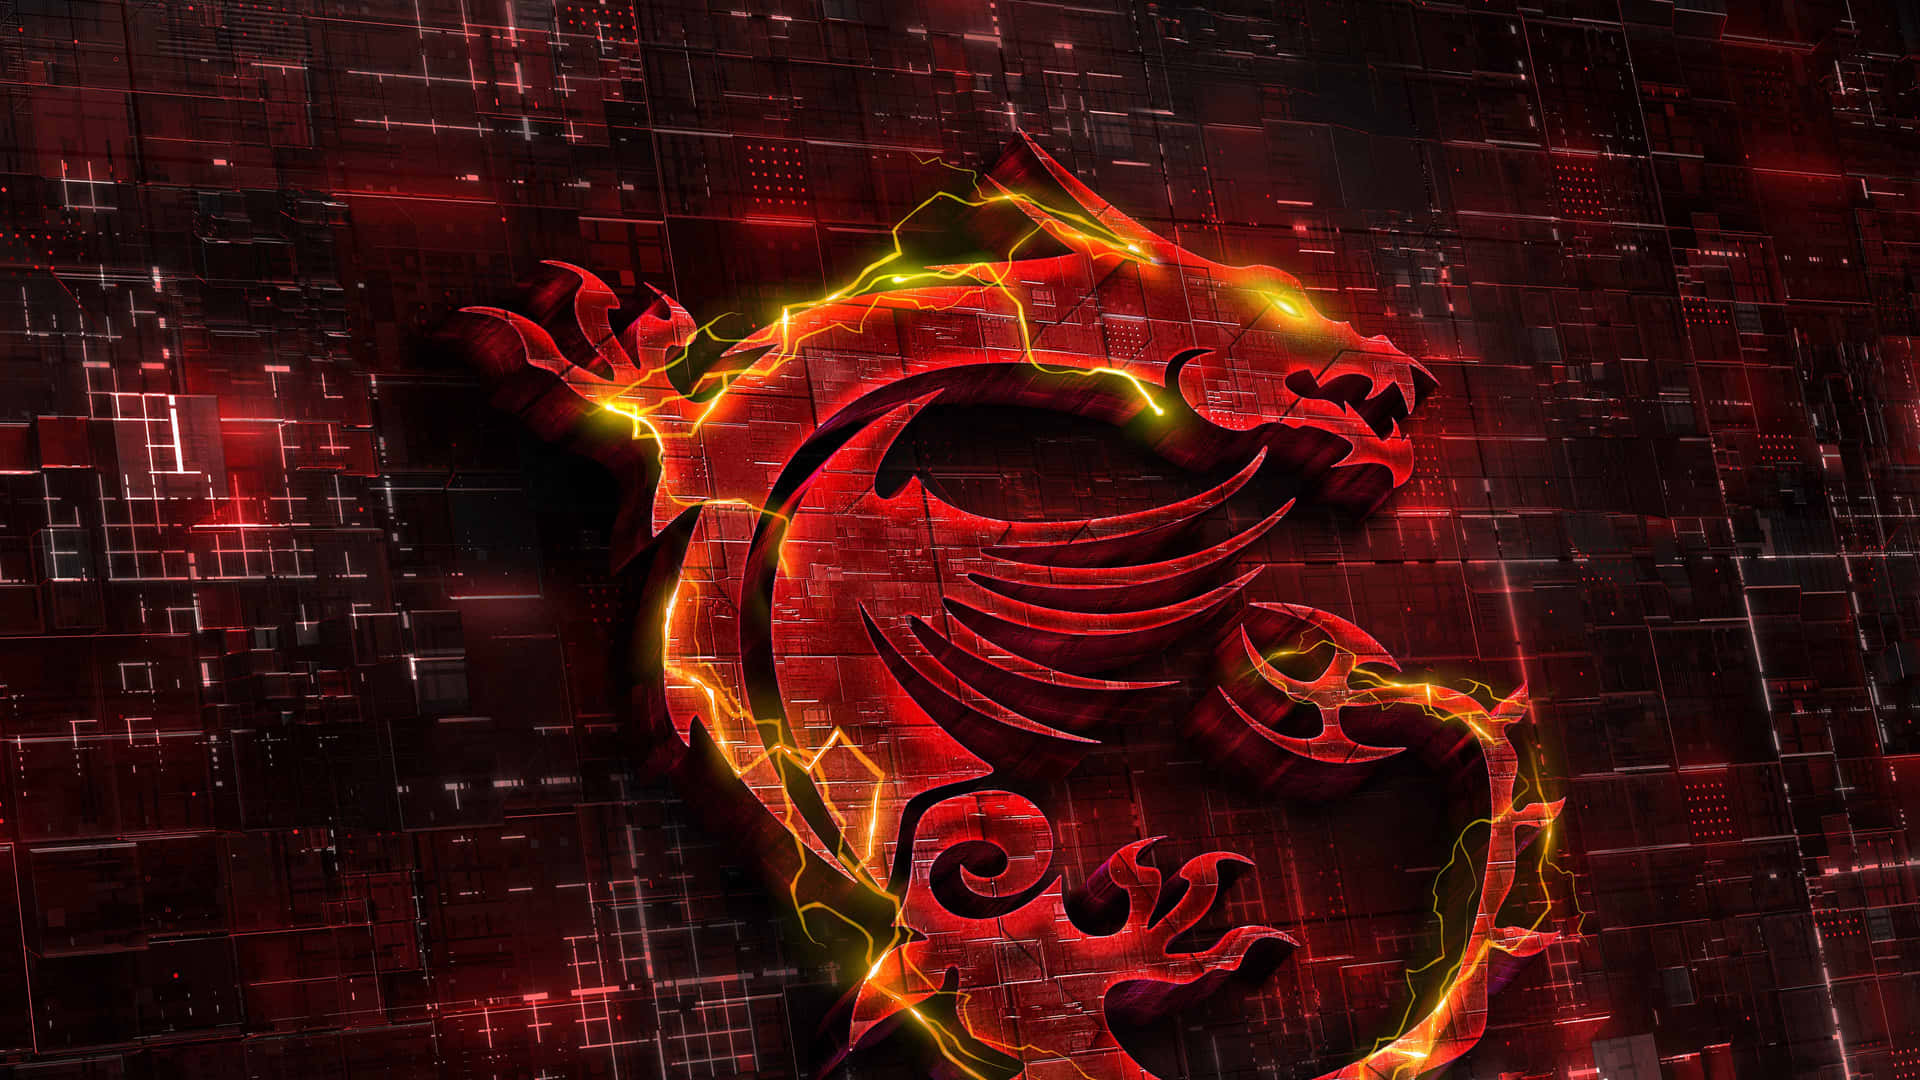 Red Gaming Dragon On Motherboard Wallpaper